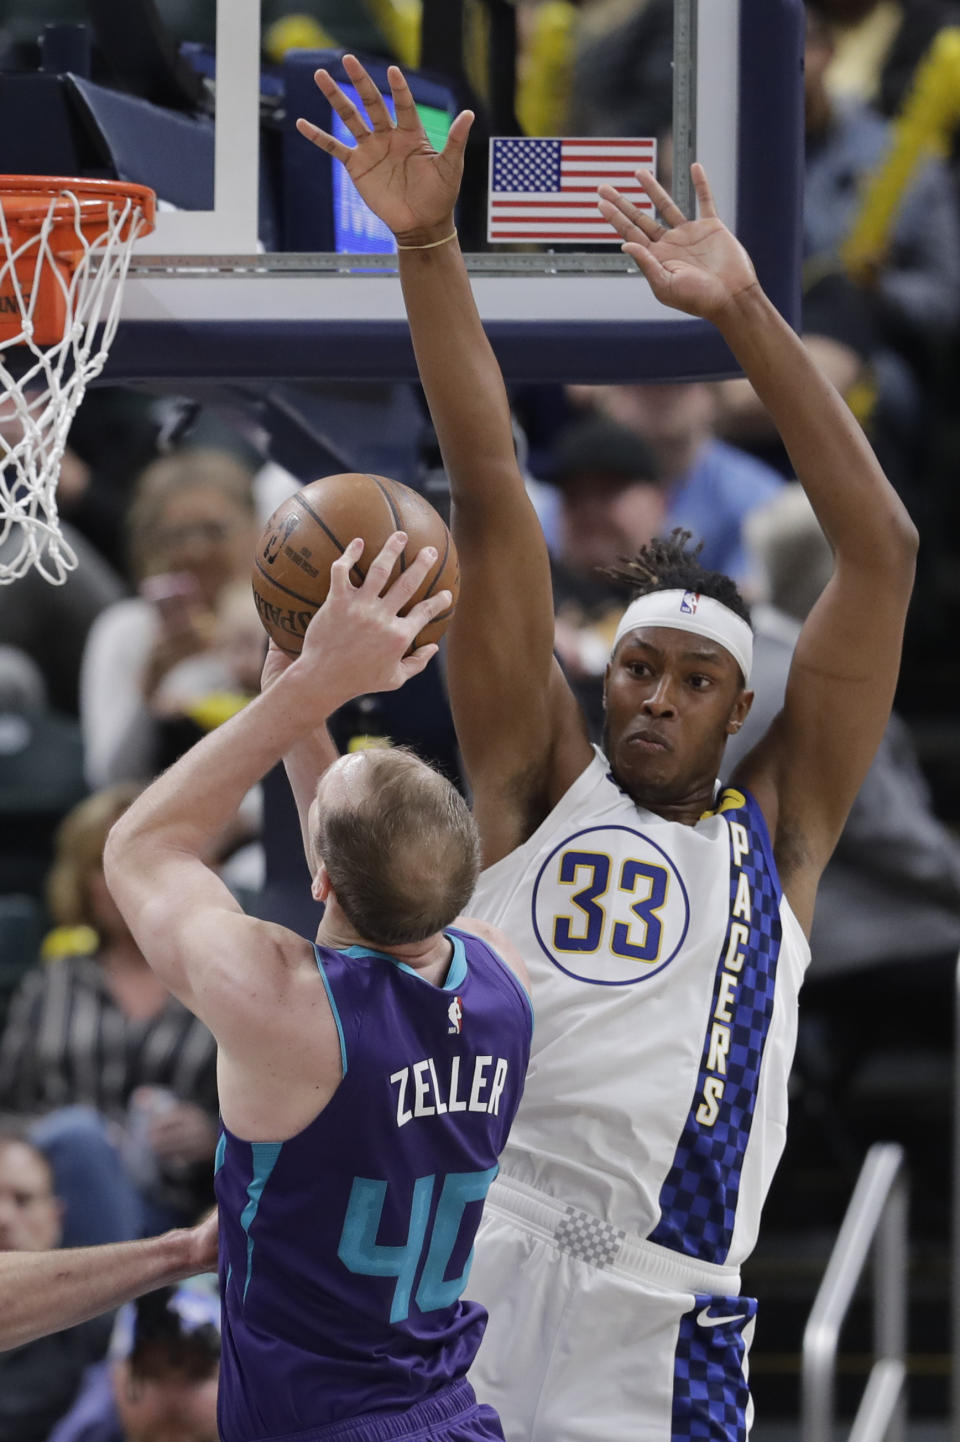 Charlotte Hornets' Cody Zeller (40) shoots against Indiana Pacers' Myles Turner (33) during the second half of an NBA basketball game, Sunday, Dec. 15, 2019, in Indianapolis. (AP Photo/Darron Cummings)